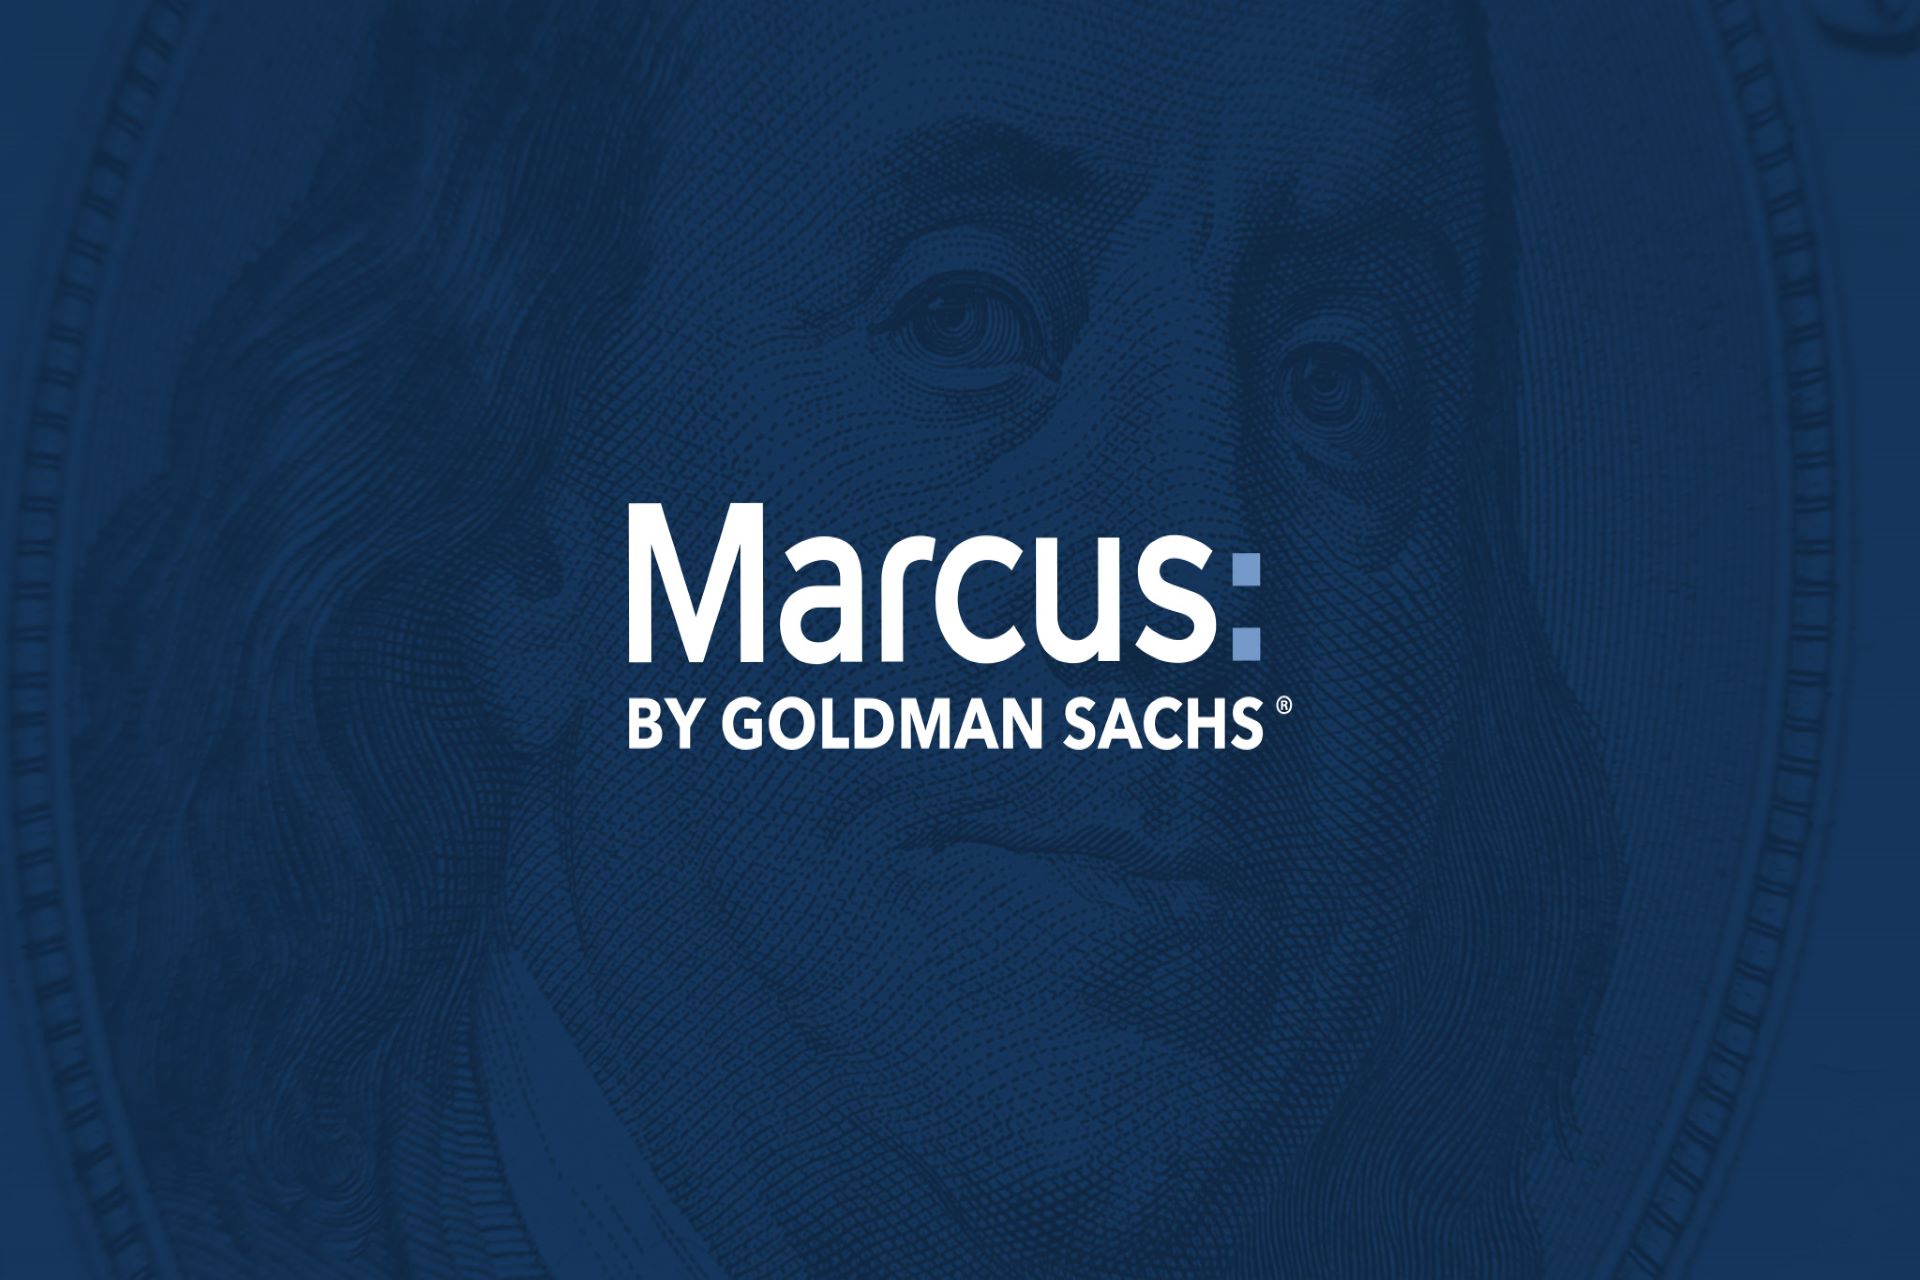 goldman-sachs-to-launch-marcus-credit-card-bestcards